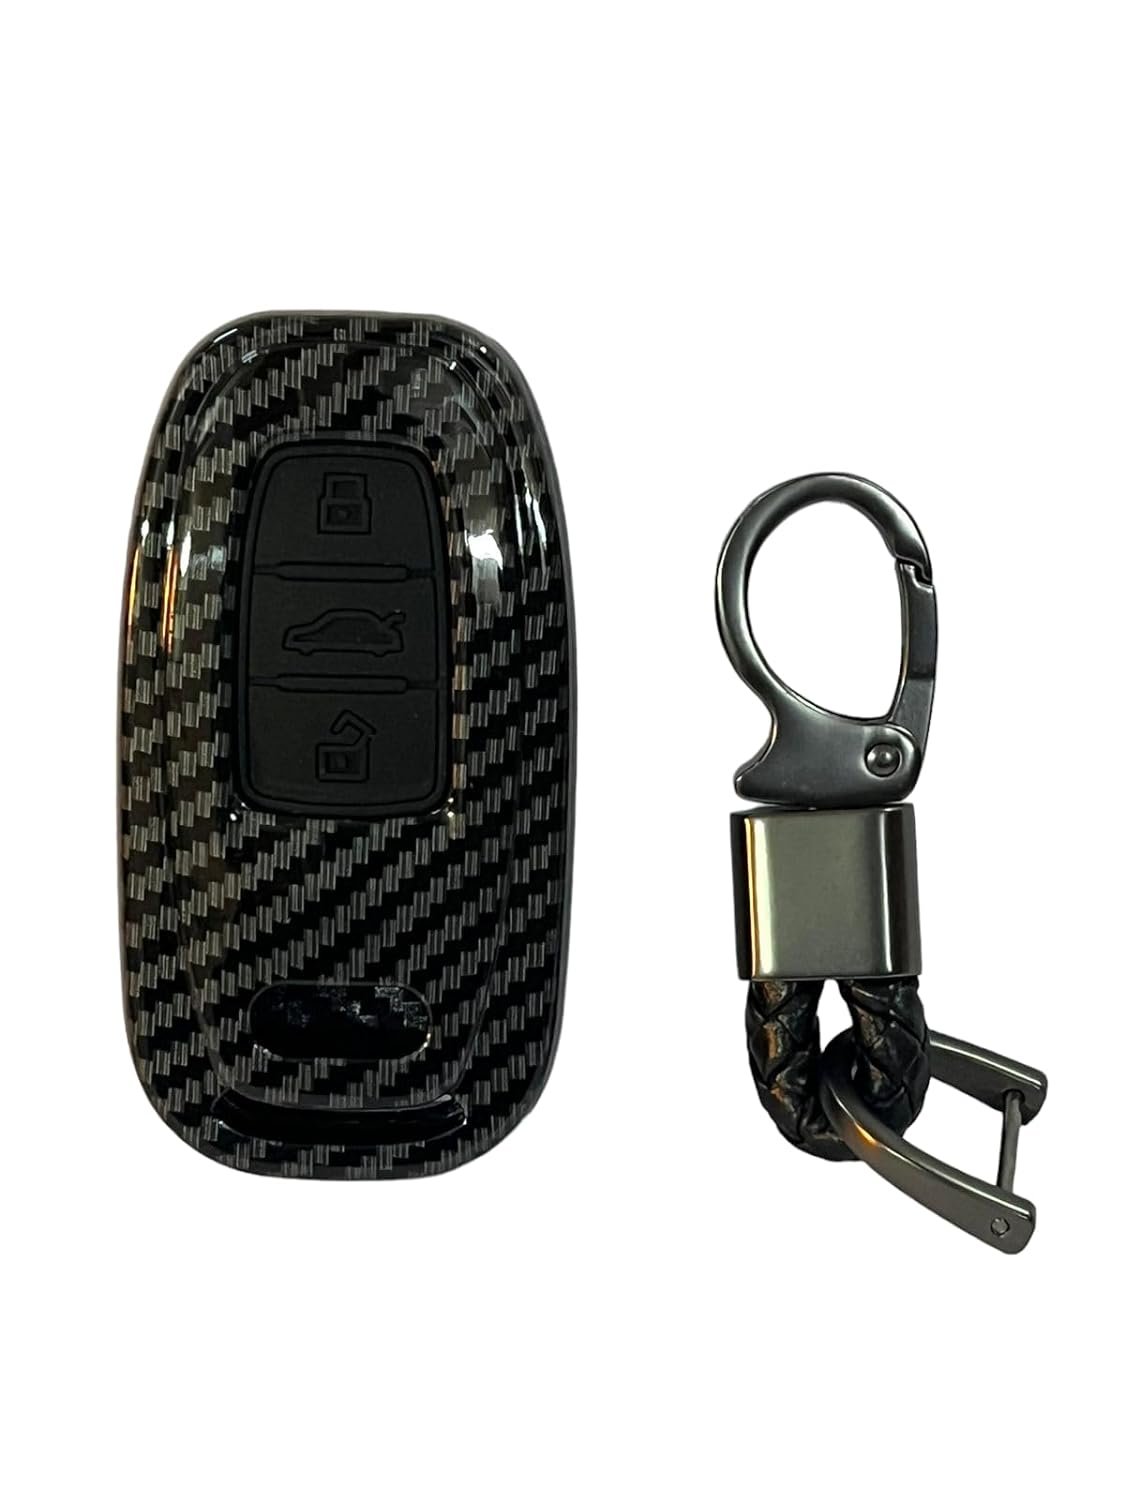 Carbon Fiber ABS Car Key Cover Compatible with Au-di Smart Key (Key Chain Included) Image 